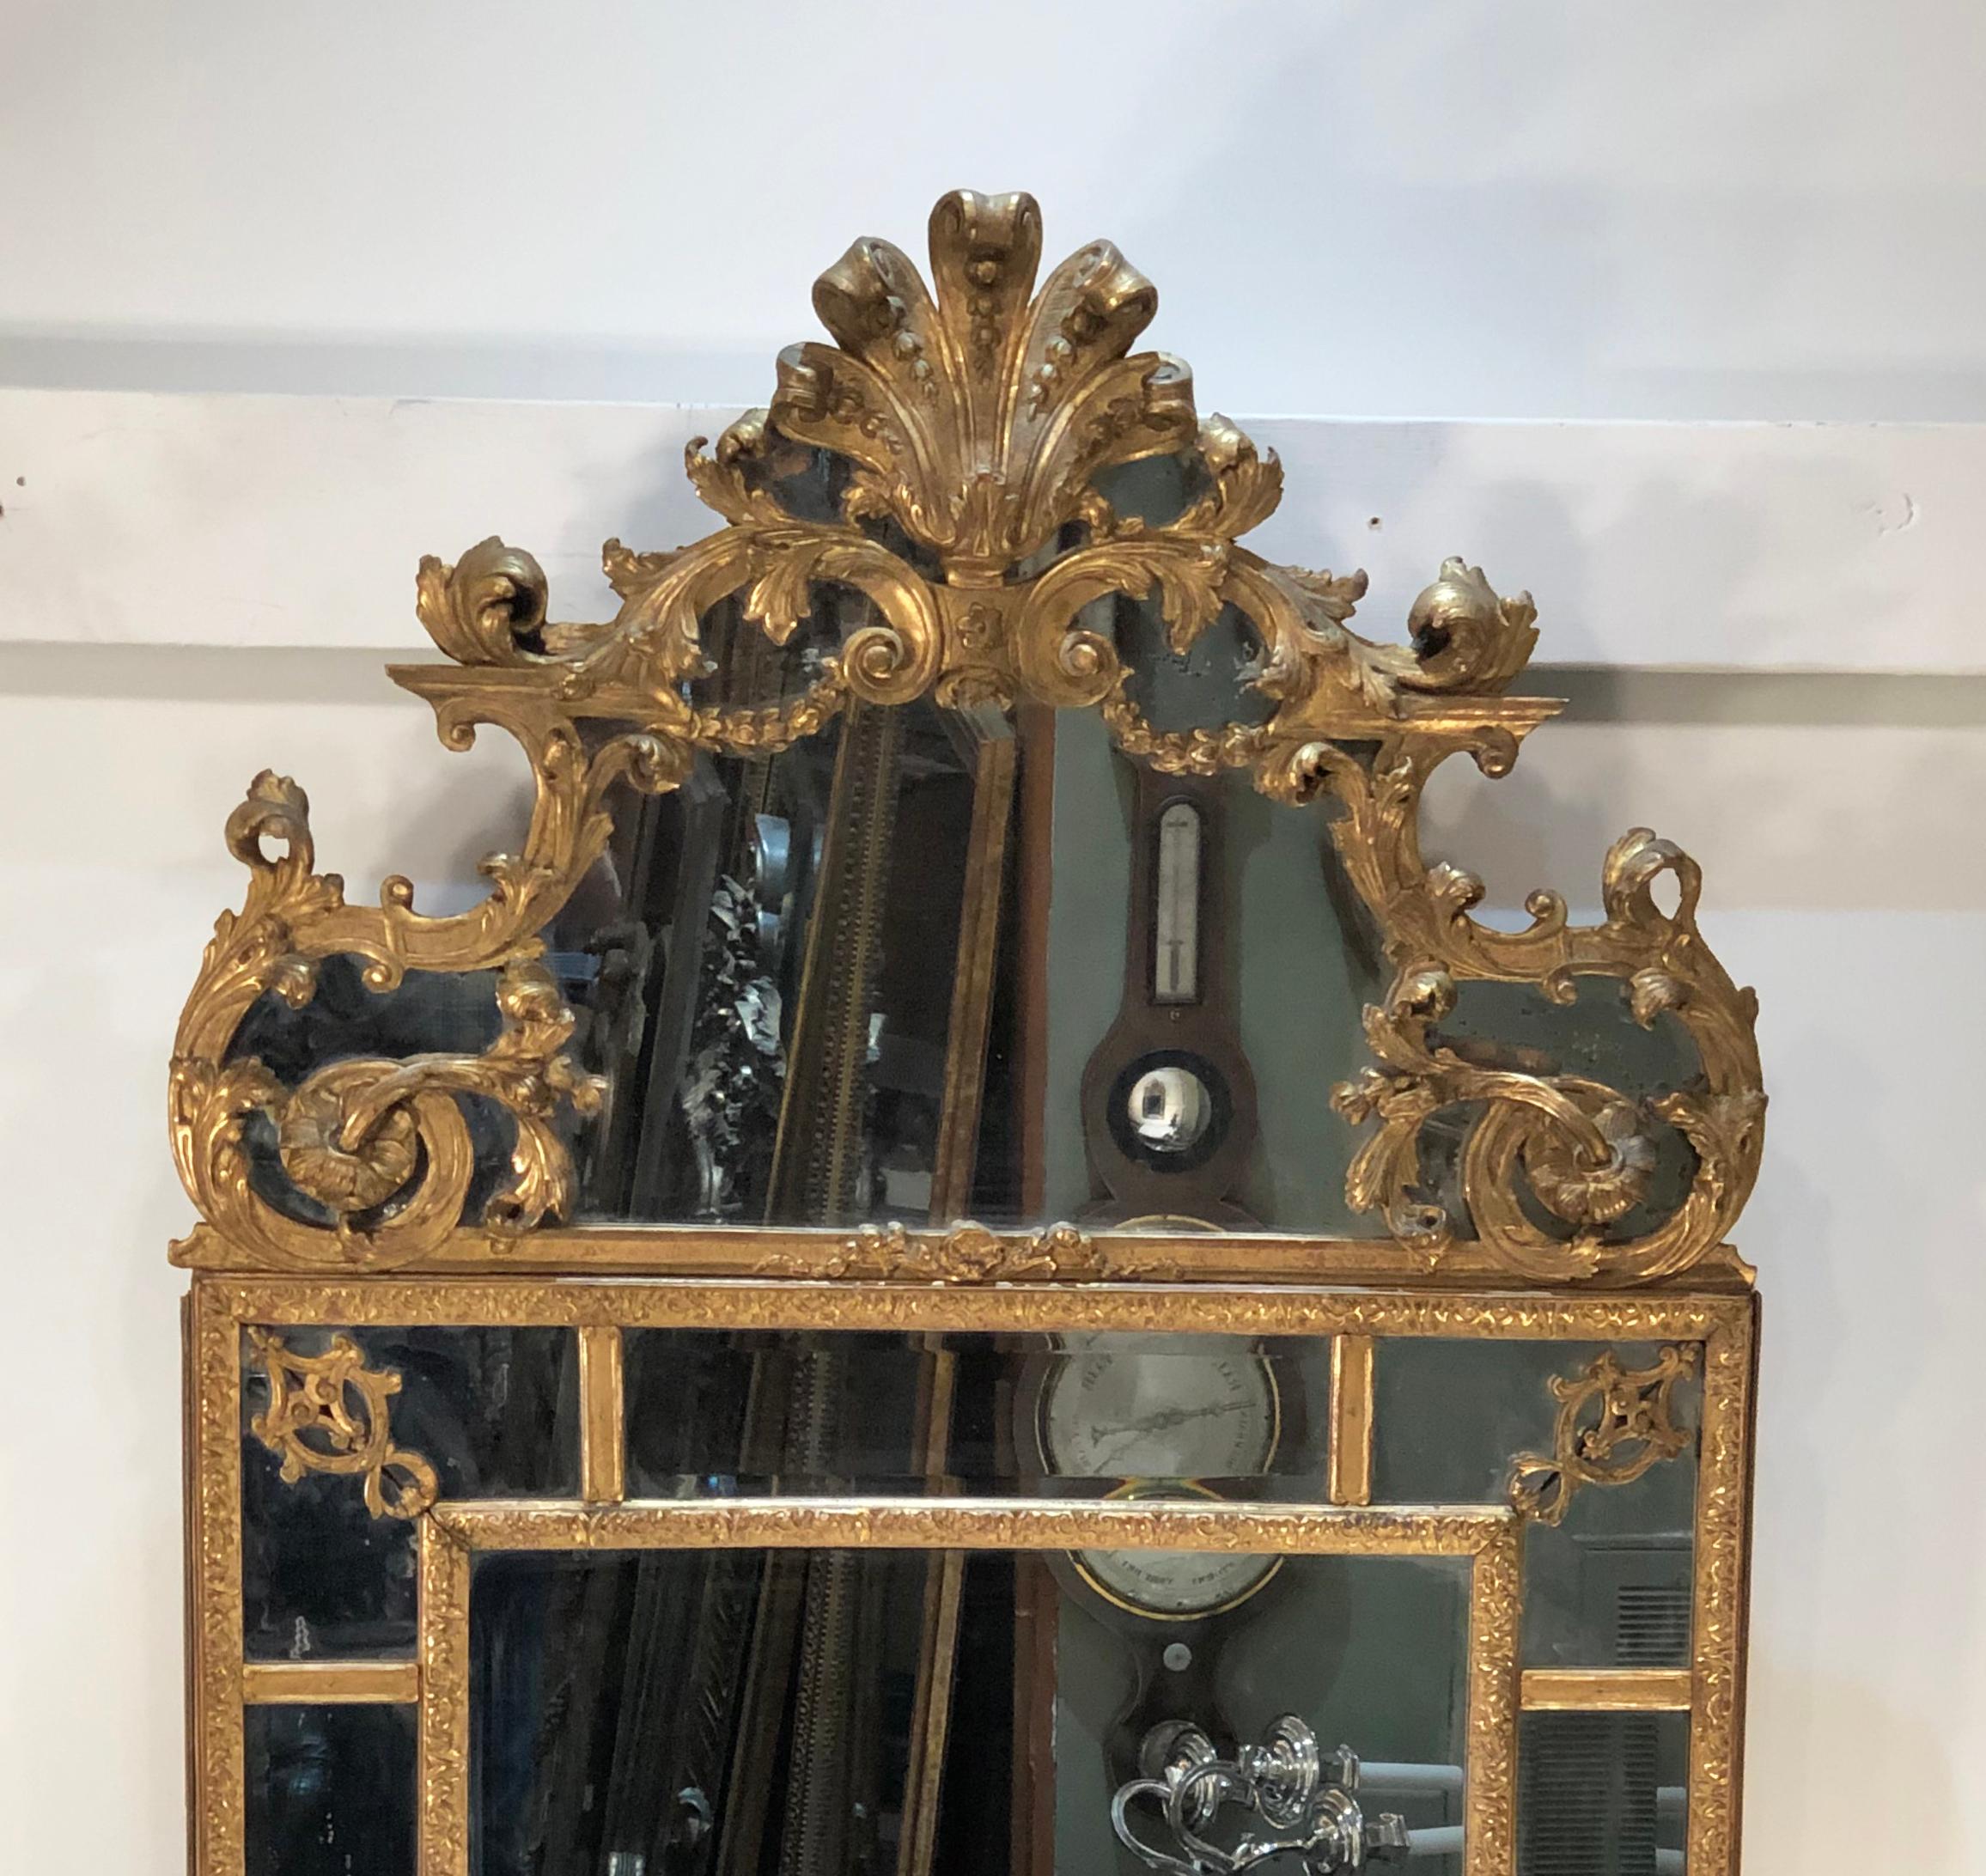 A Grande Scale French Régence looking glass is all carved giltwood with mirrored borders, circa 1715 - 1730. (see page pg. 185 of World Mirrors by Graham Child) The carved giltwood and mirror pediment can be removed from the top. The center looking